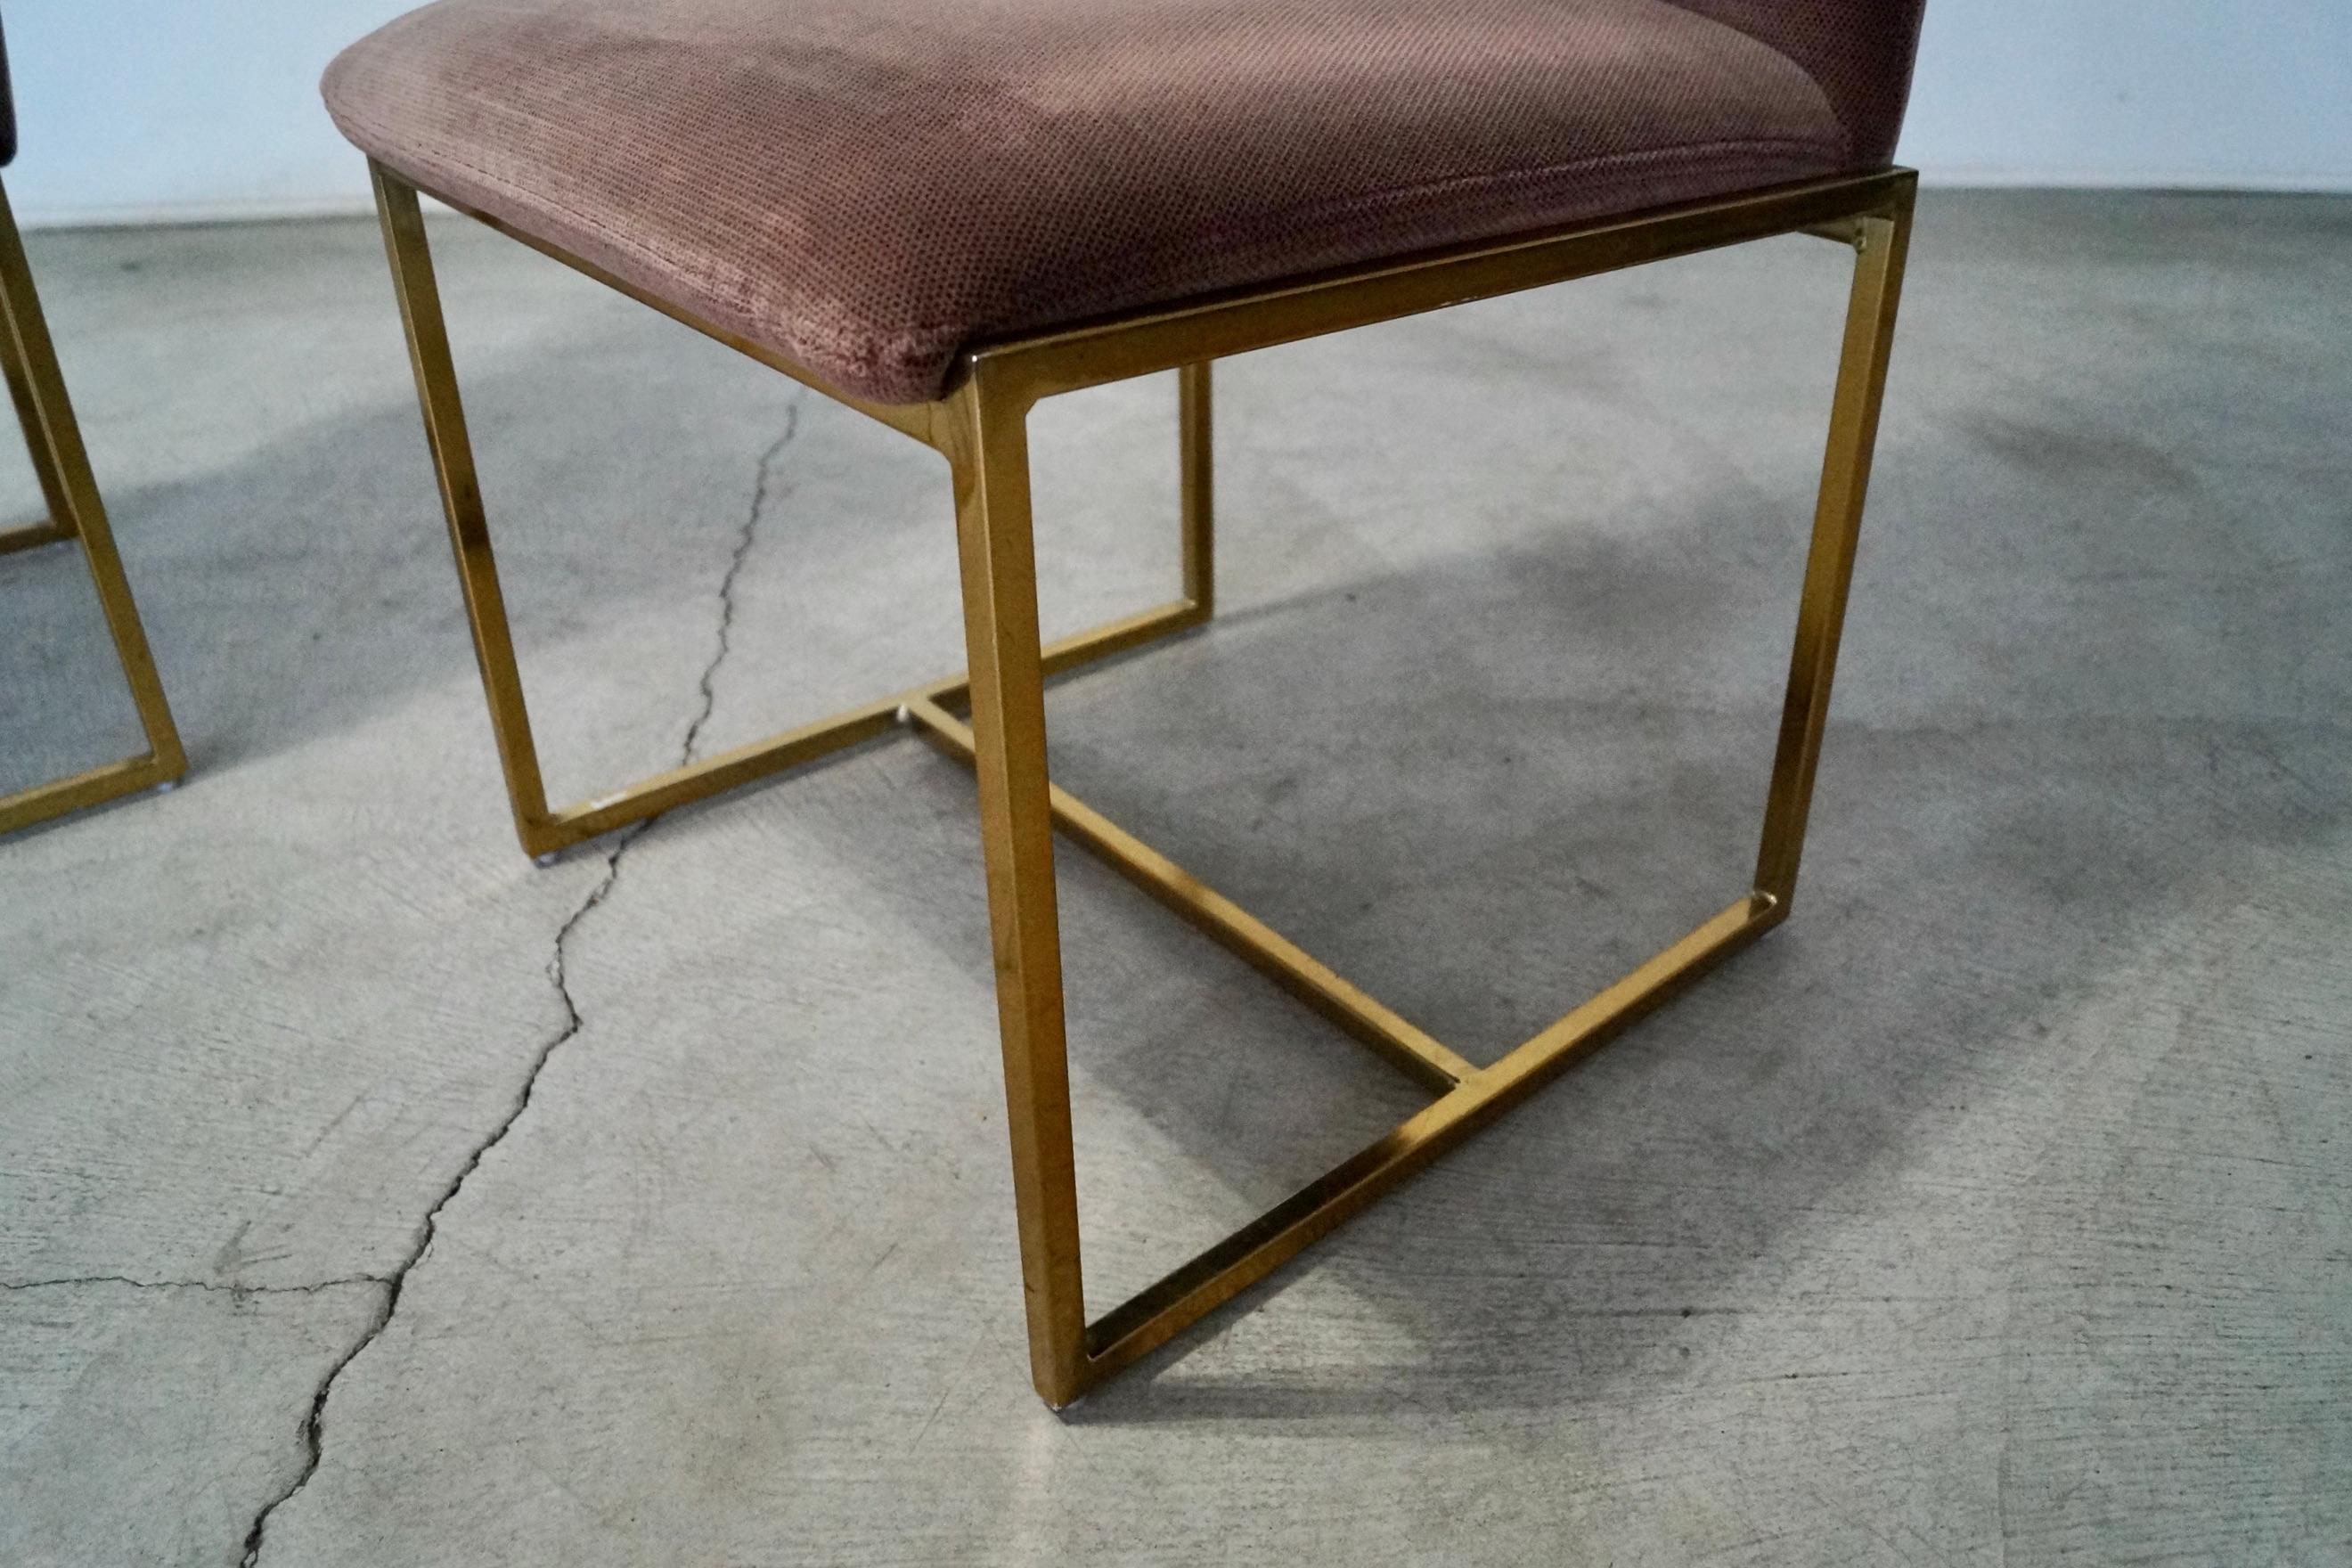 1970's Mid-Century Modern Milo Baughman Style Brass Dining Chairs - a Pair For Sale 9